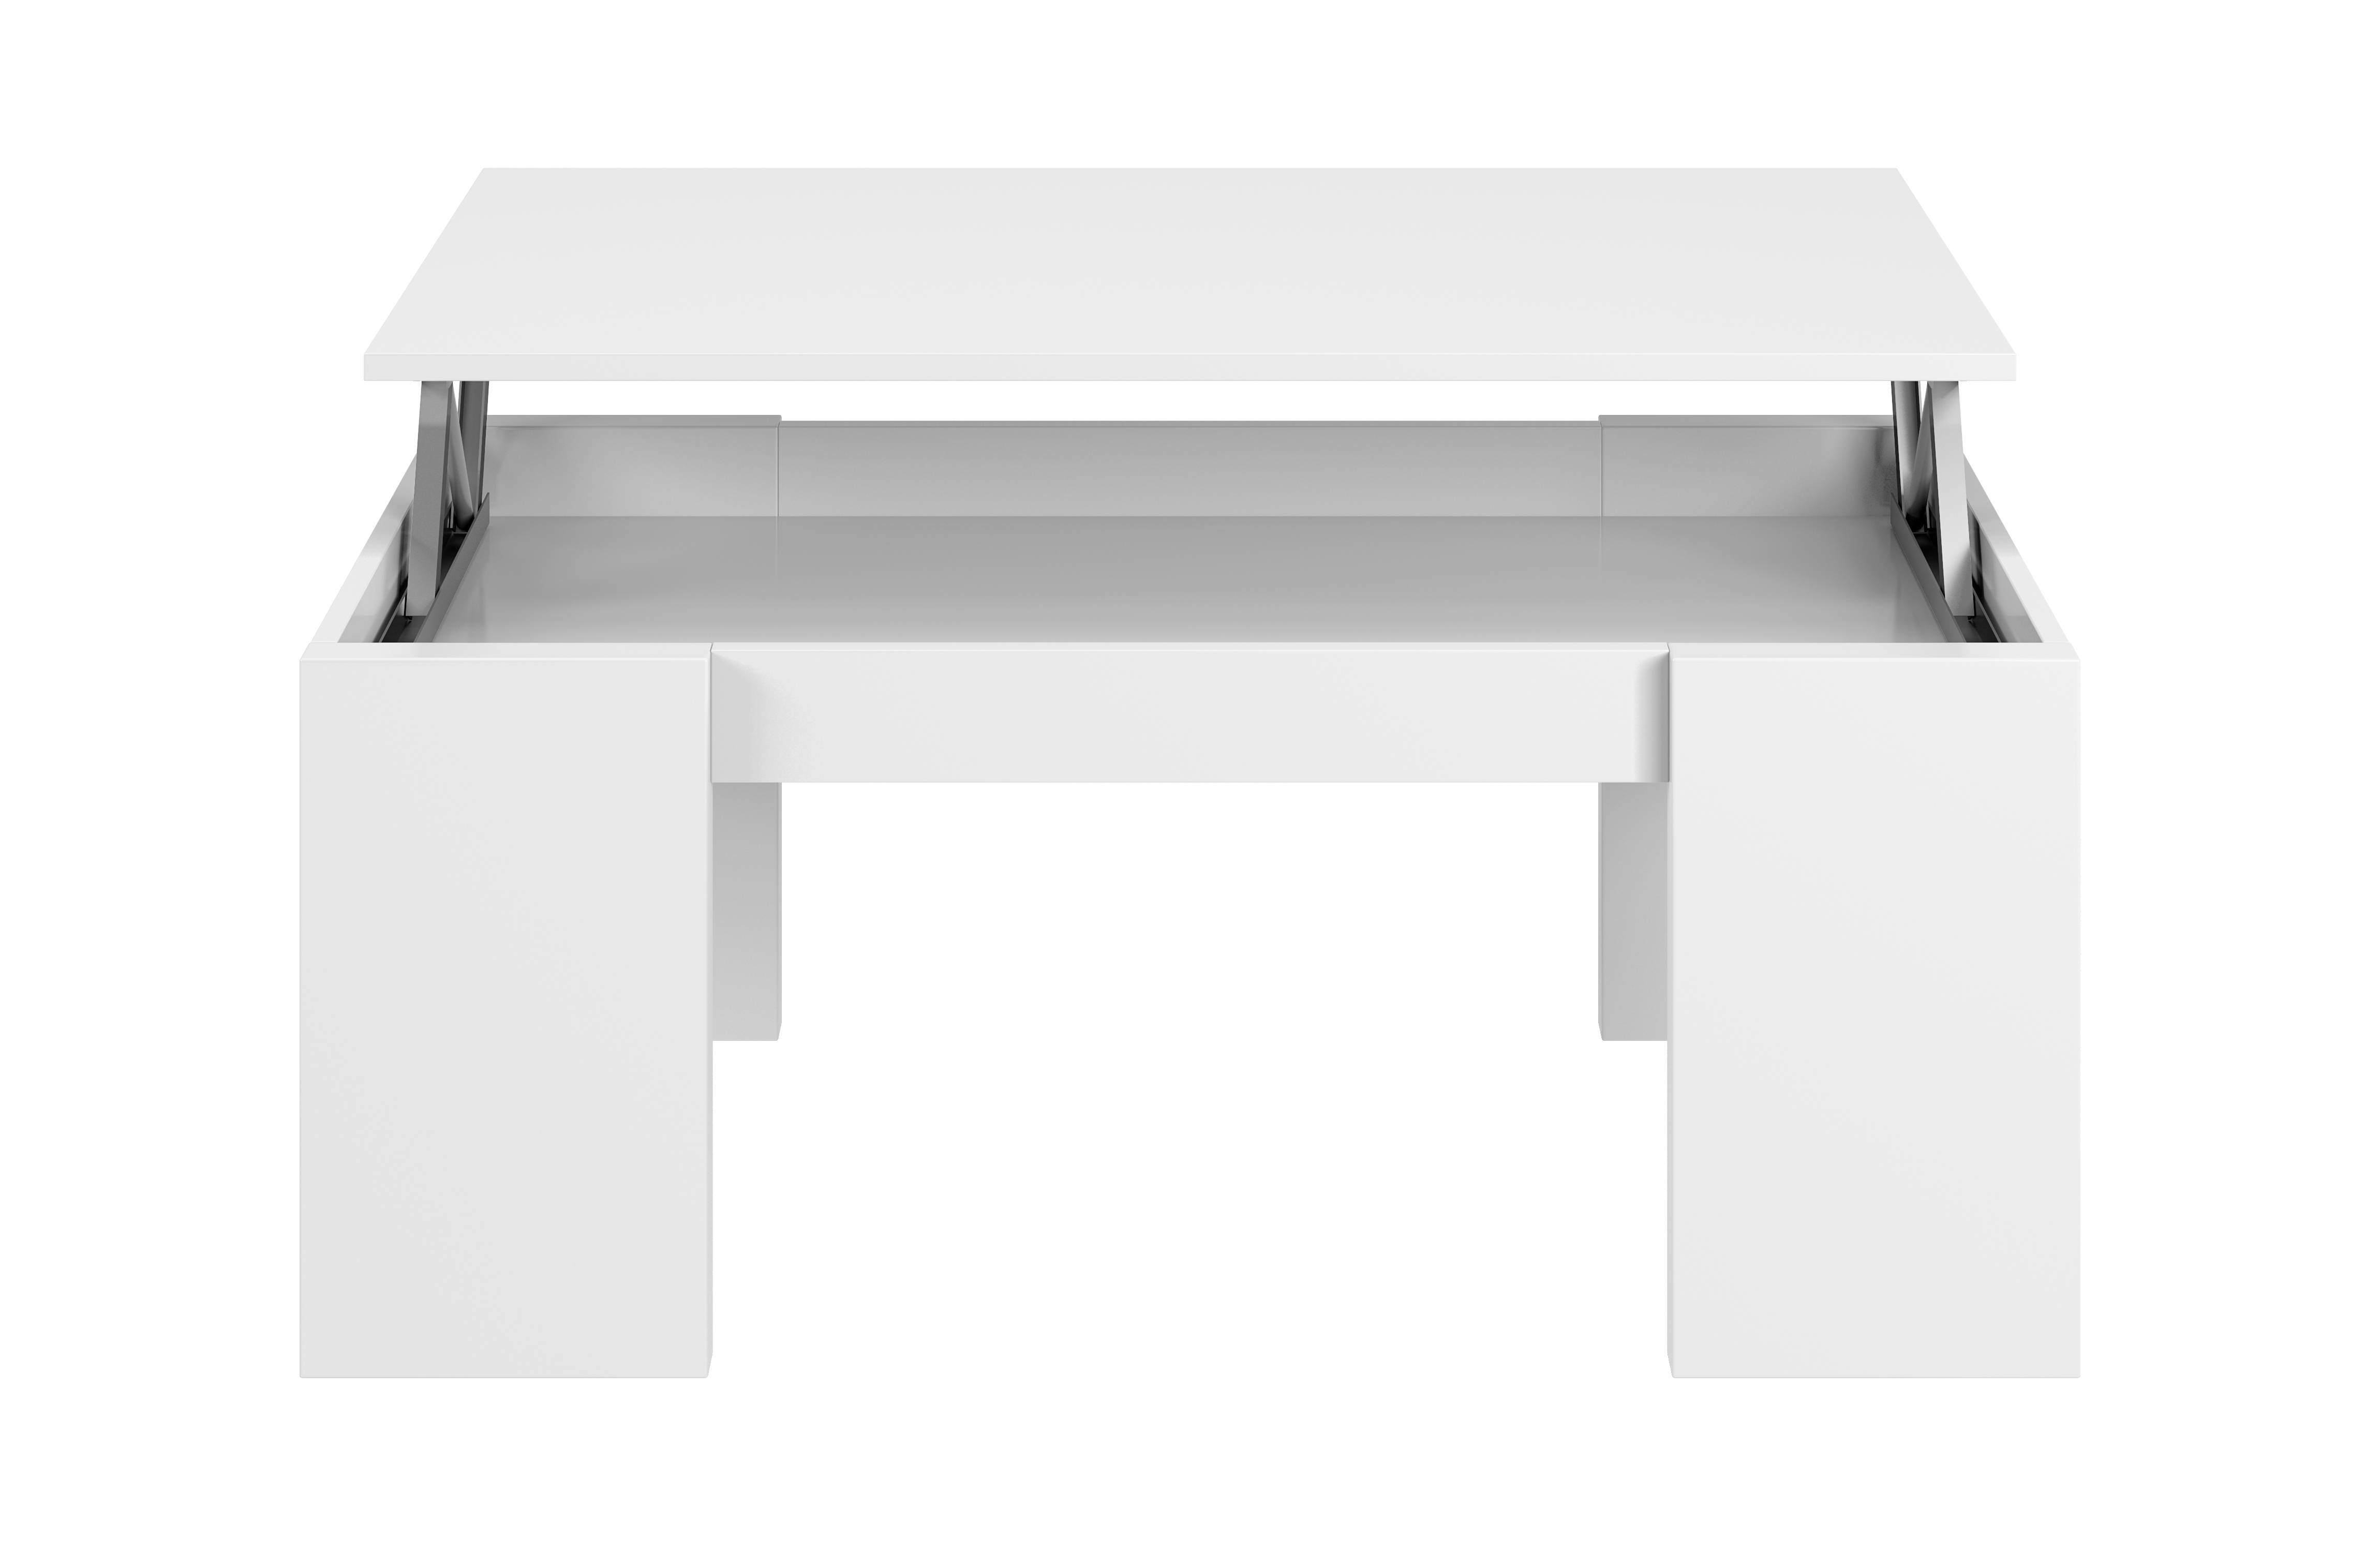 FORES 001637BO COFFEE TABLE LIFT-UP WHITE 43CM X 100CM X 50CM